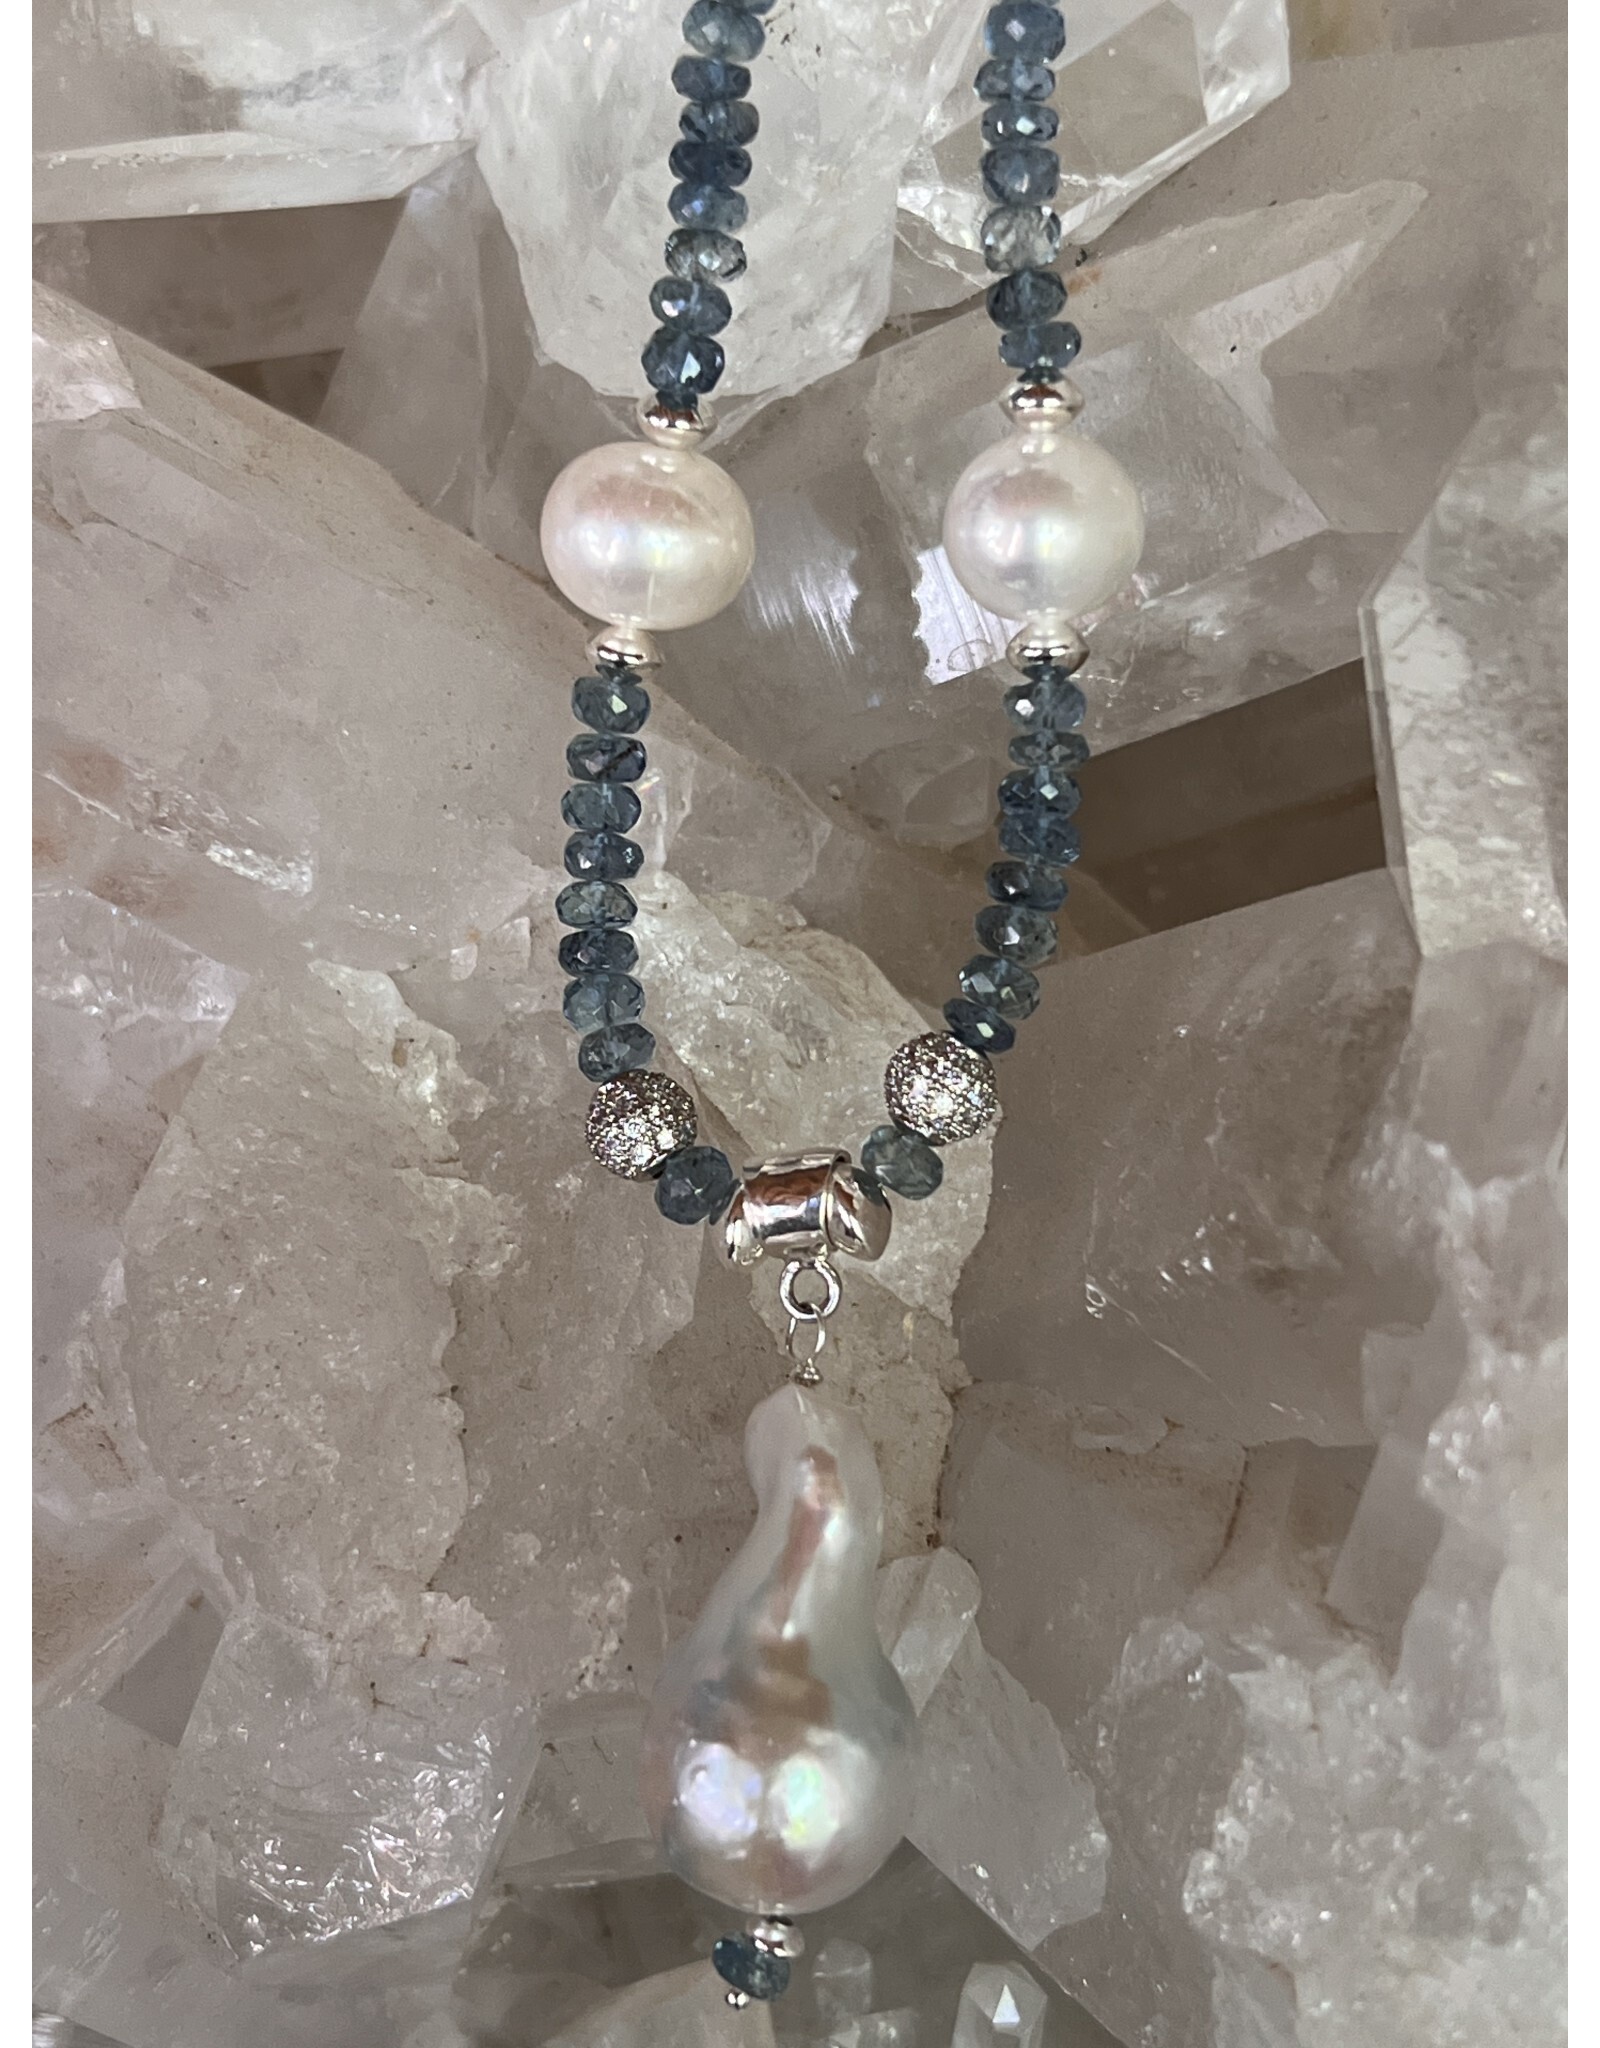 Annette Colby - Jeweler Baroque Pearl Faceted Aquamarine Necklace - AC*